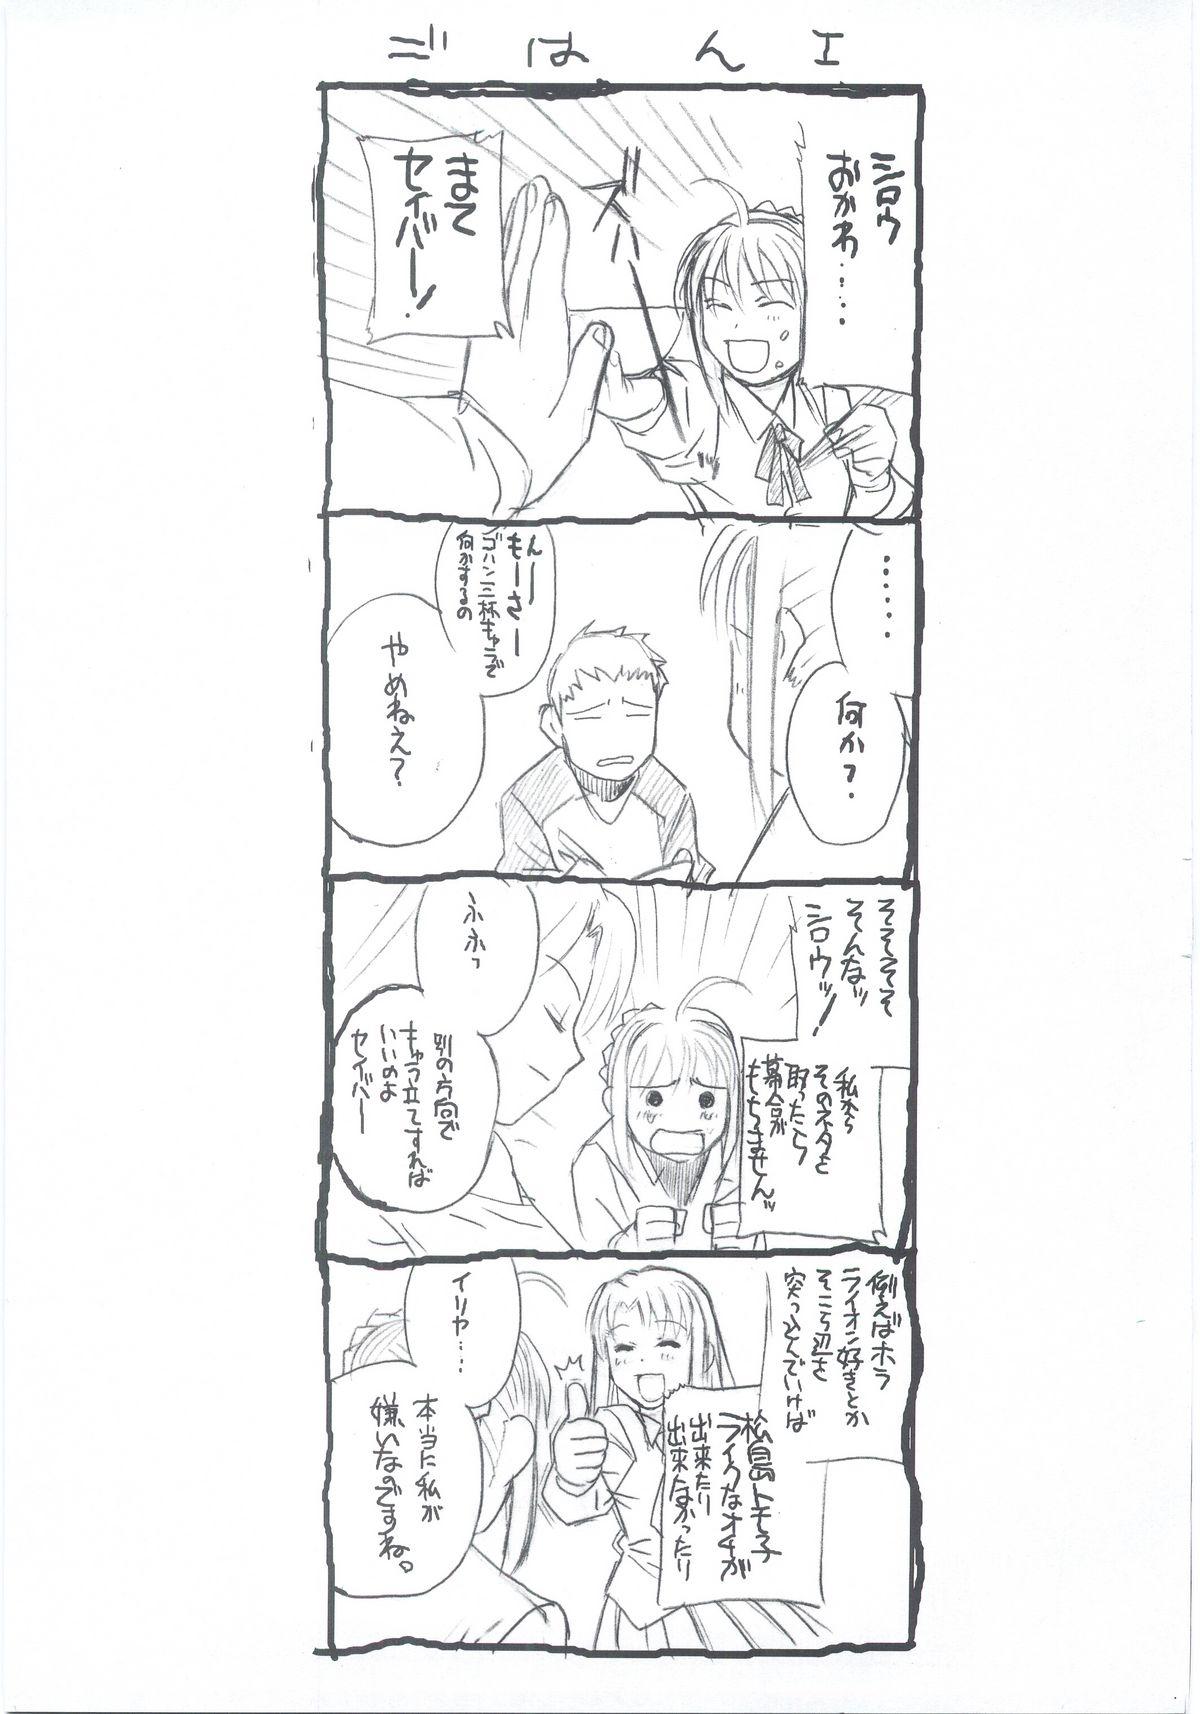 Rubbing Fate/Over lord - Fate stay night Gay - Page 12